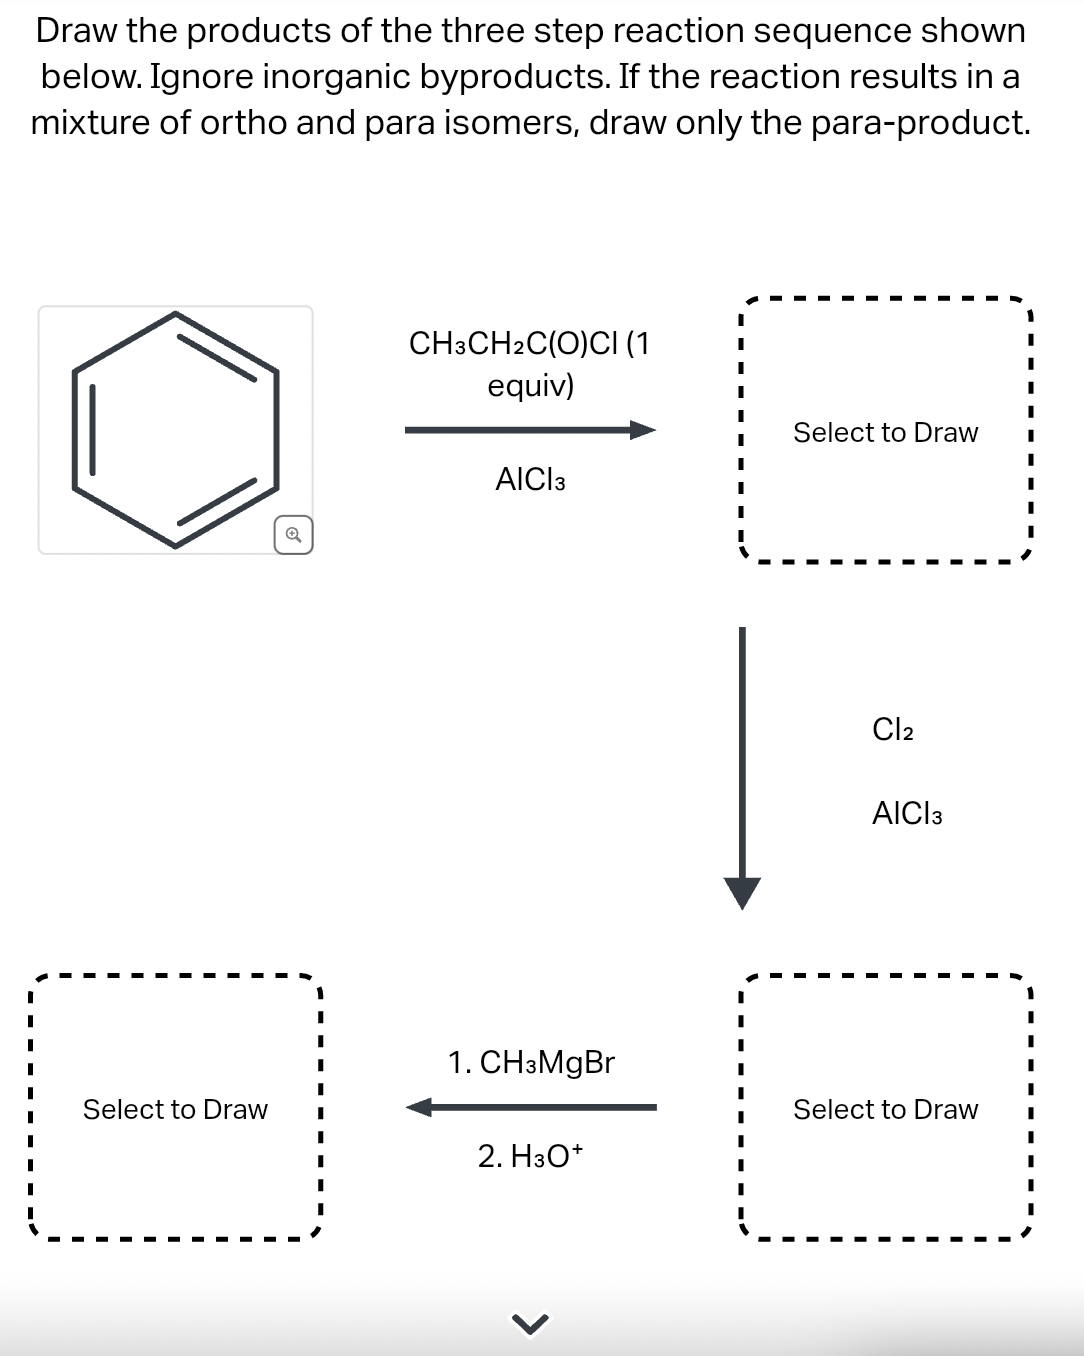 Draw the products of the three step reaction sequence shown
below. Ignore inorganic byproducts. If the reaction results in a
mixture of ortho and para isomers, draw only the para-product.
Select to Draw
Q
CH3CH2C(O)CI (1
equiv)
AICI 3
1. CH3MgBr
2. H3O+
I
Select to Draw I
I
I
Cl₂
AICI 3
Select to Draw
I
I